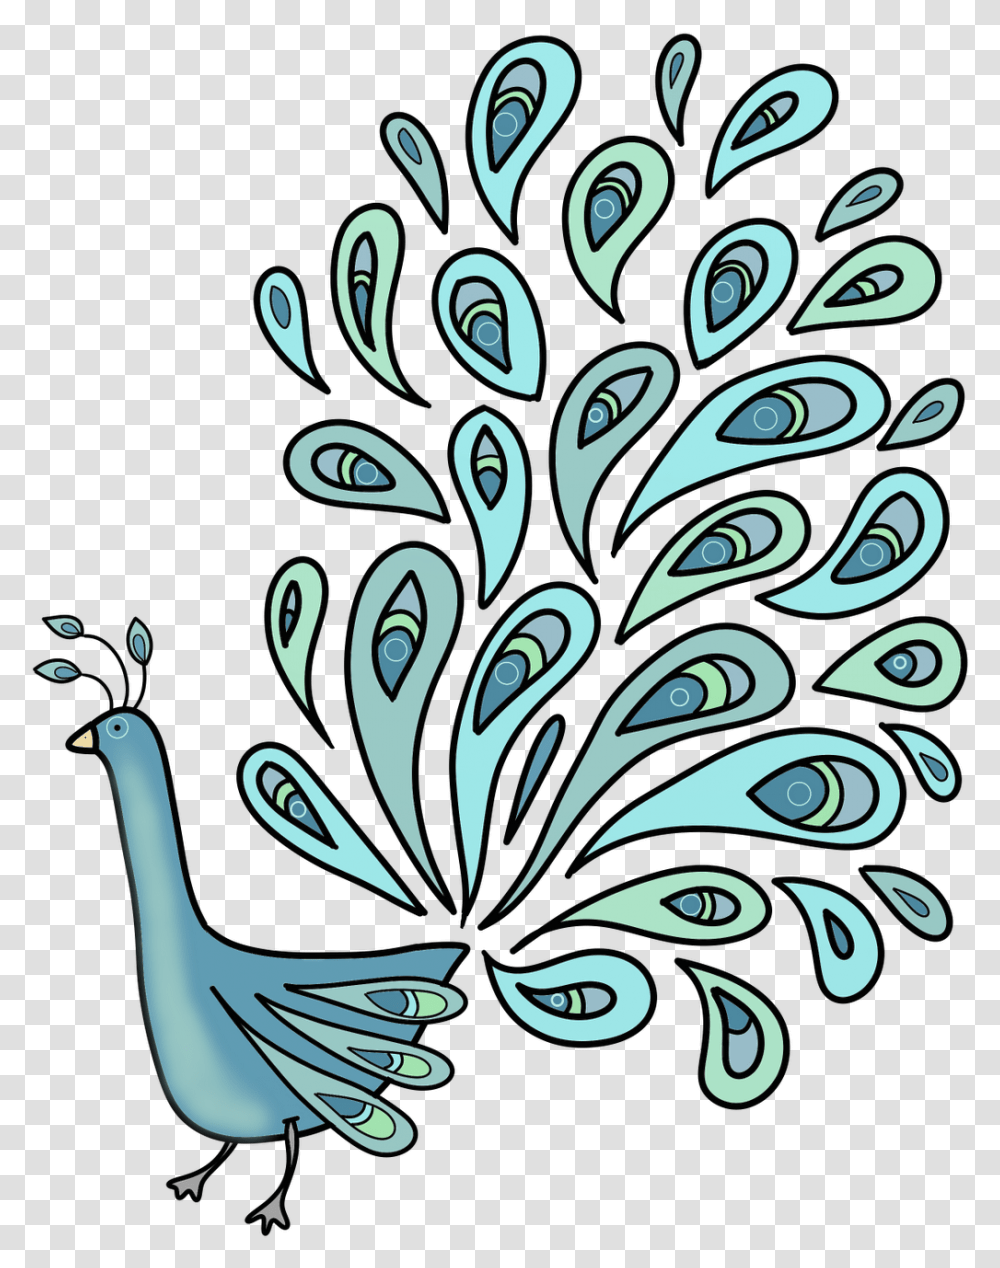 Download Single Peacock Feathers Peafowl Colouring, Graphics, Art, Floral Design, Pattern Transparent Png